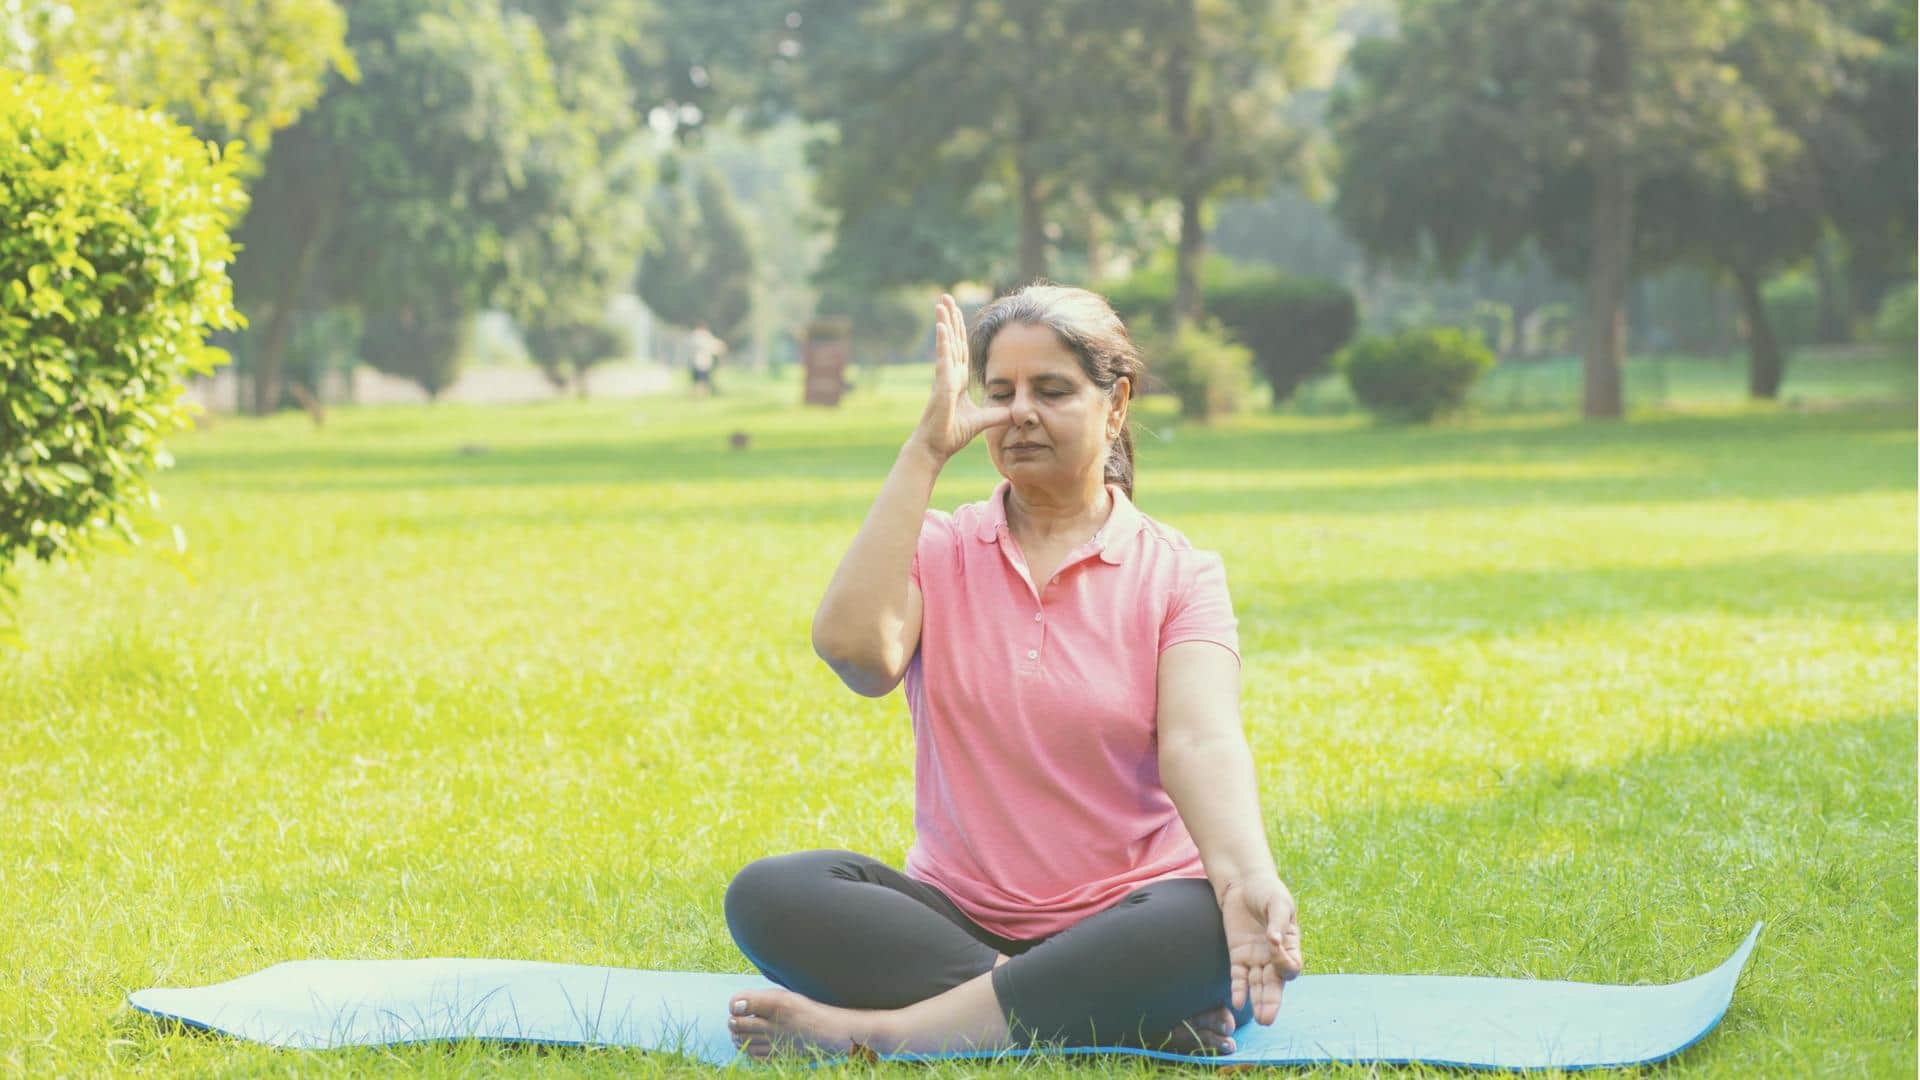 Effective breathing exercises for asthma patients